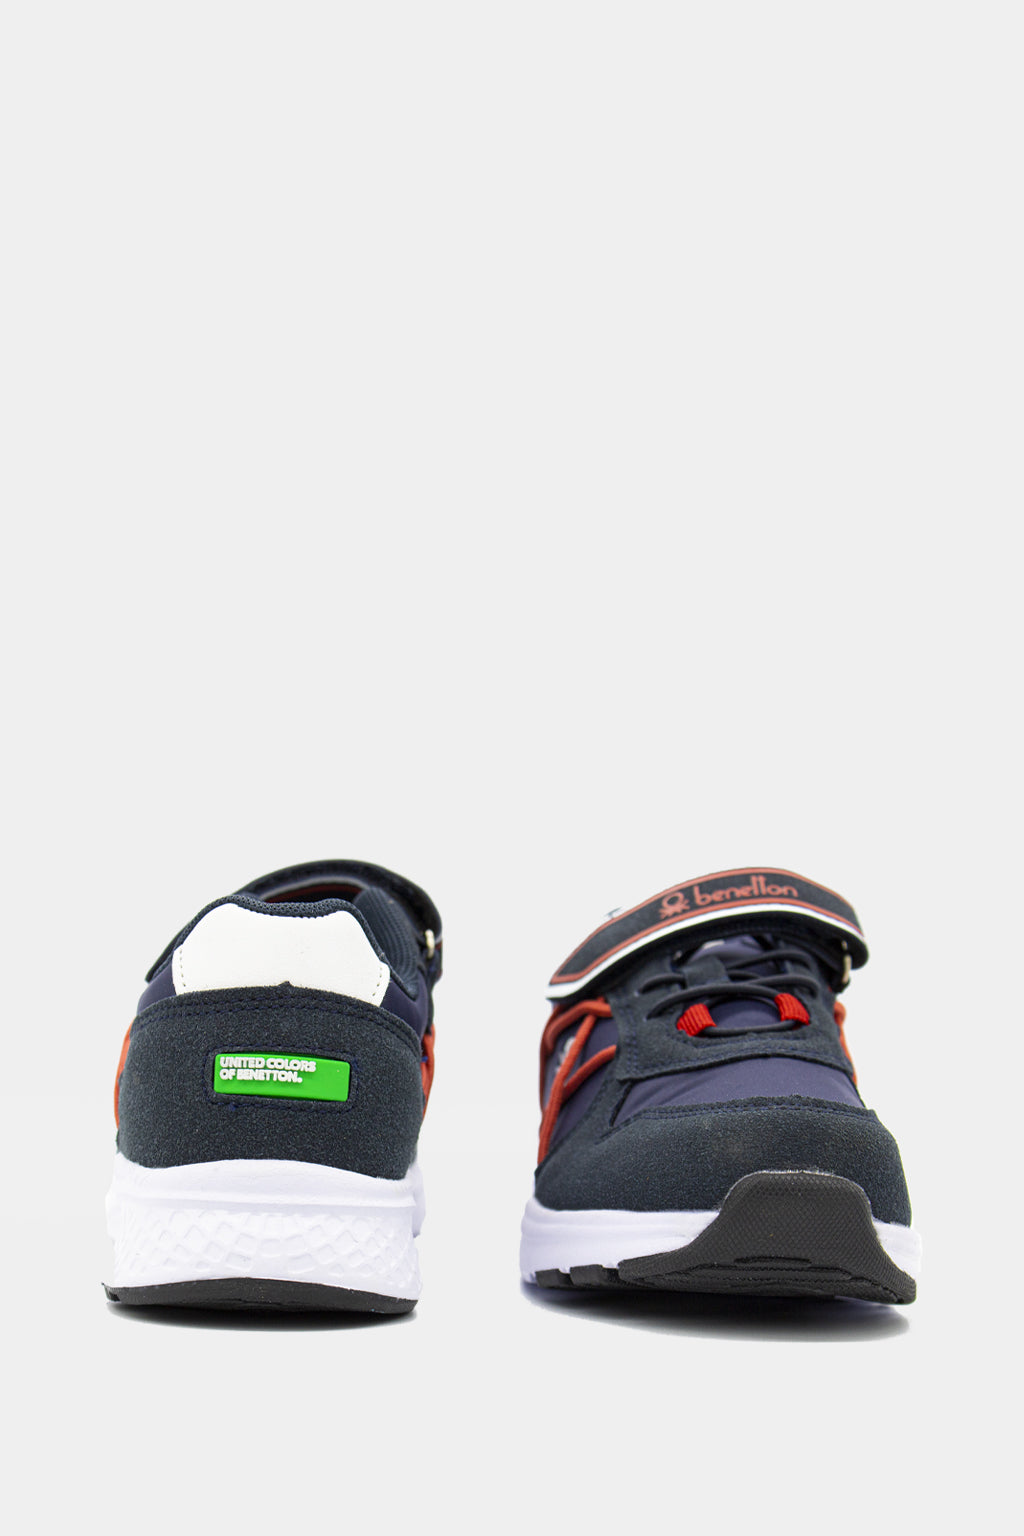 United Colors of Benetton - Ascent NYX Velcro